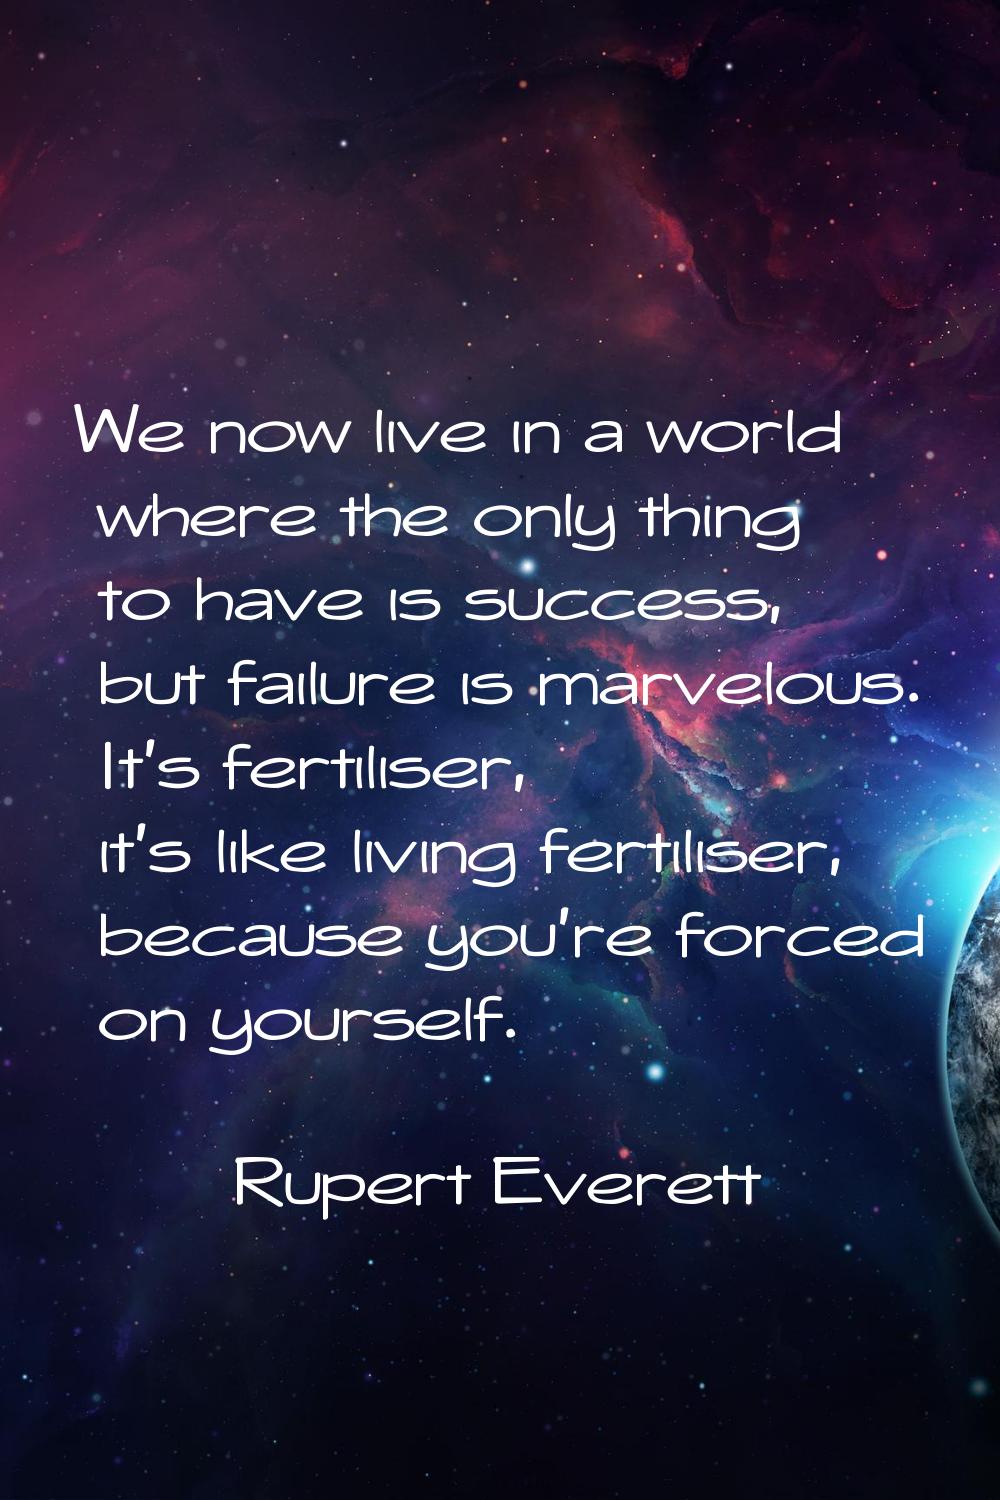 We now live in a world where the only thing to have is success, but failure is marvelous. It's fert